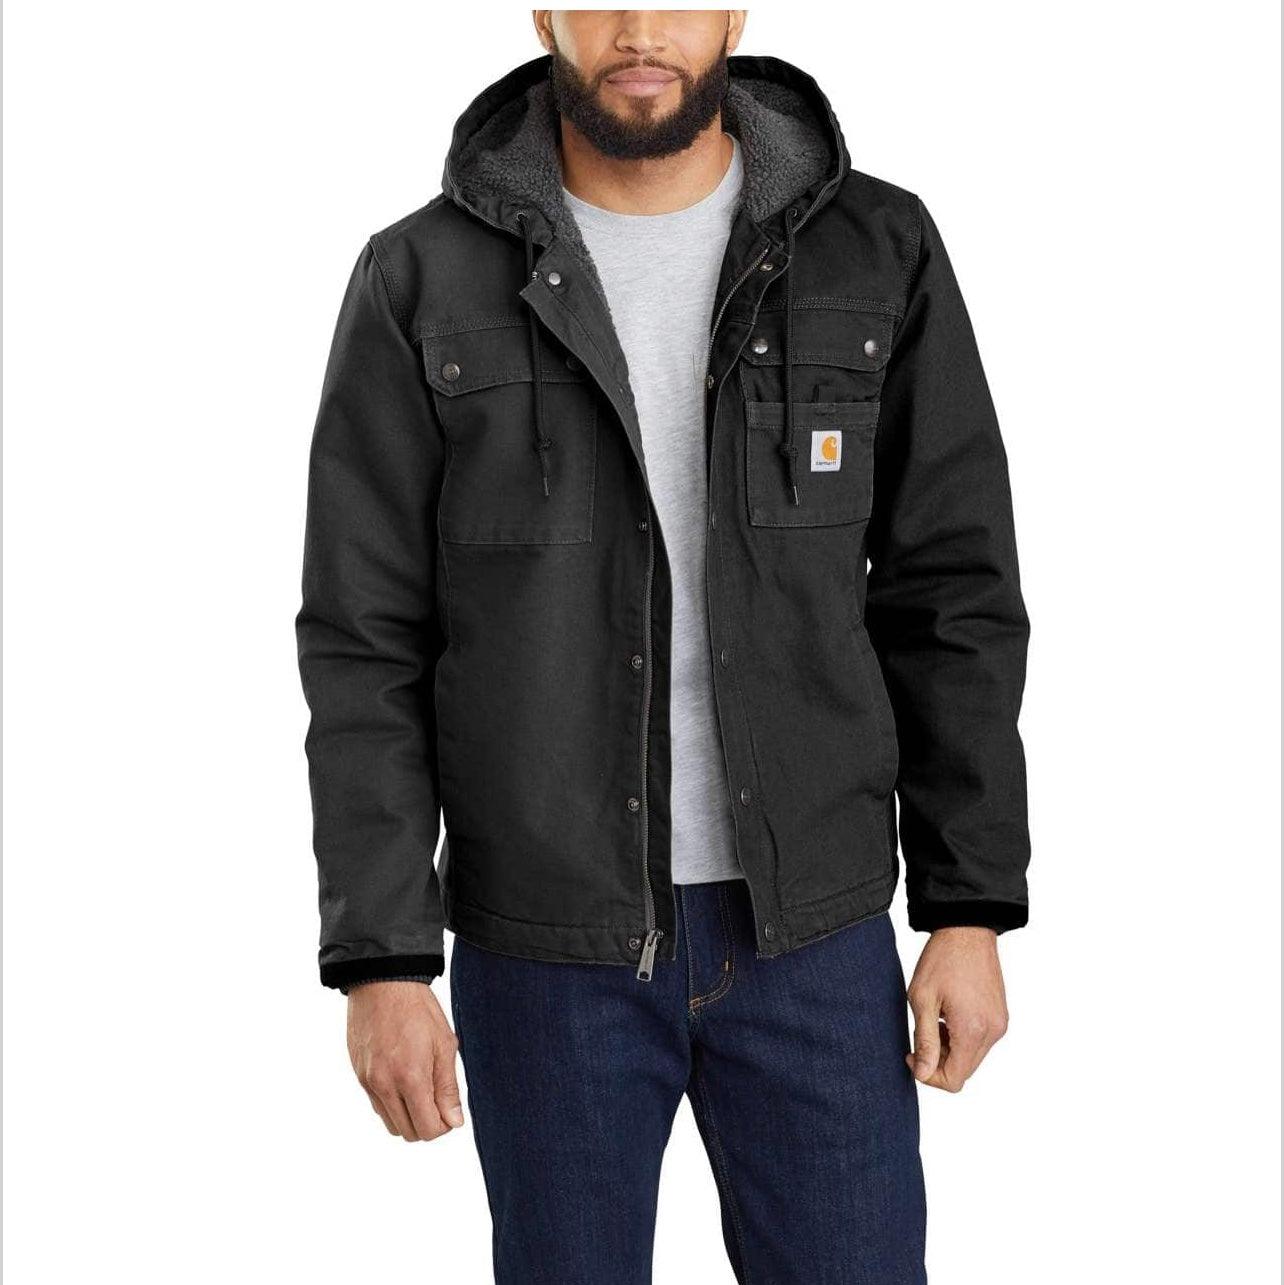 SHERPA LINED UTILITY JCKT (BLK) - Purpose-Built / Home of the Trades